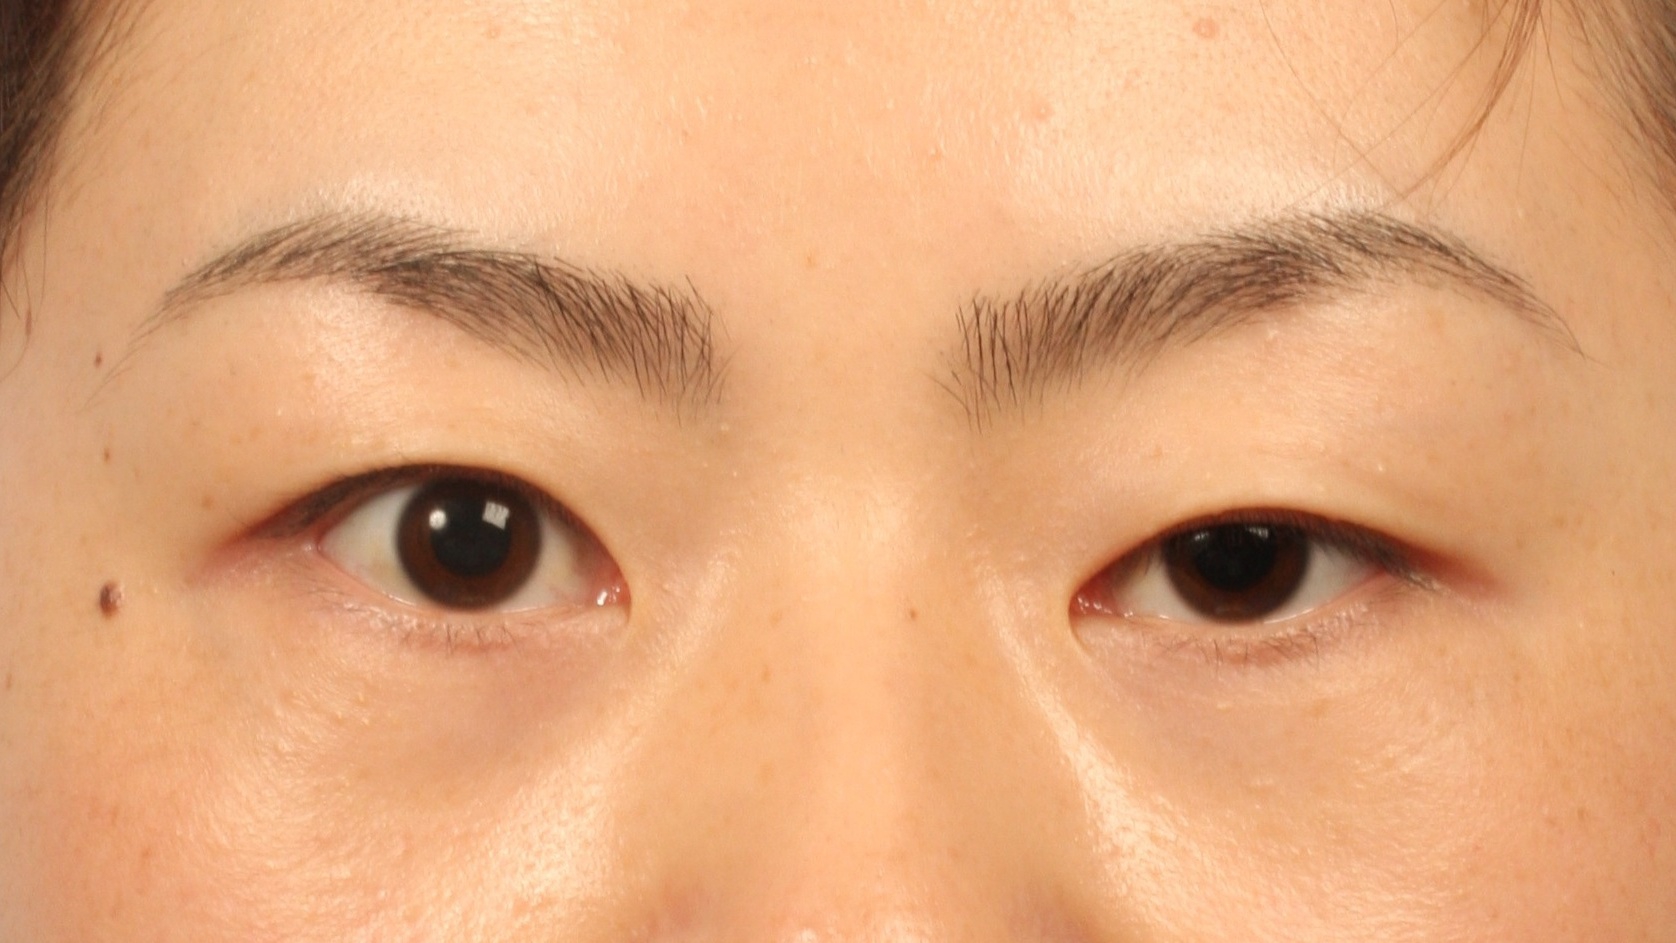 What are the causes of having one eye with a single eyelid and the other eye with a double eyelid?